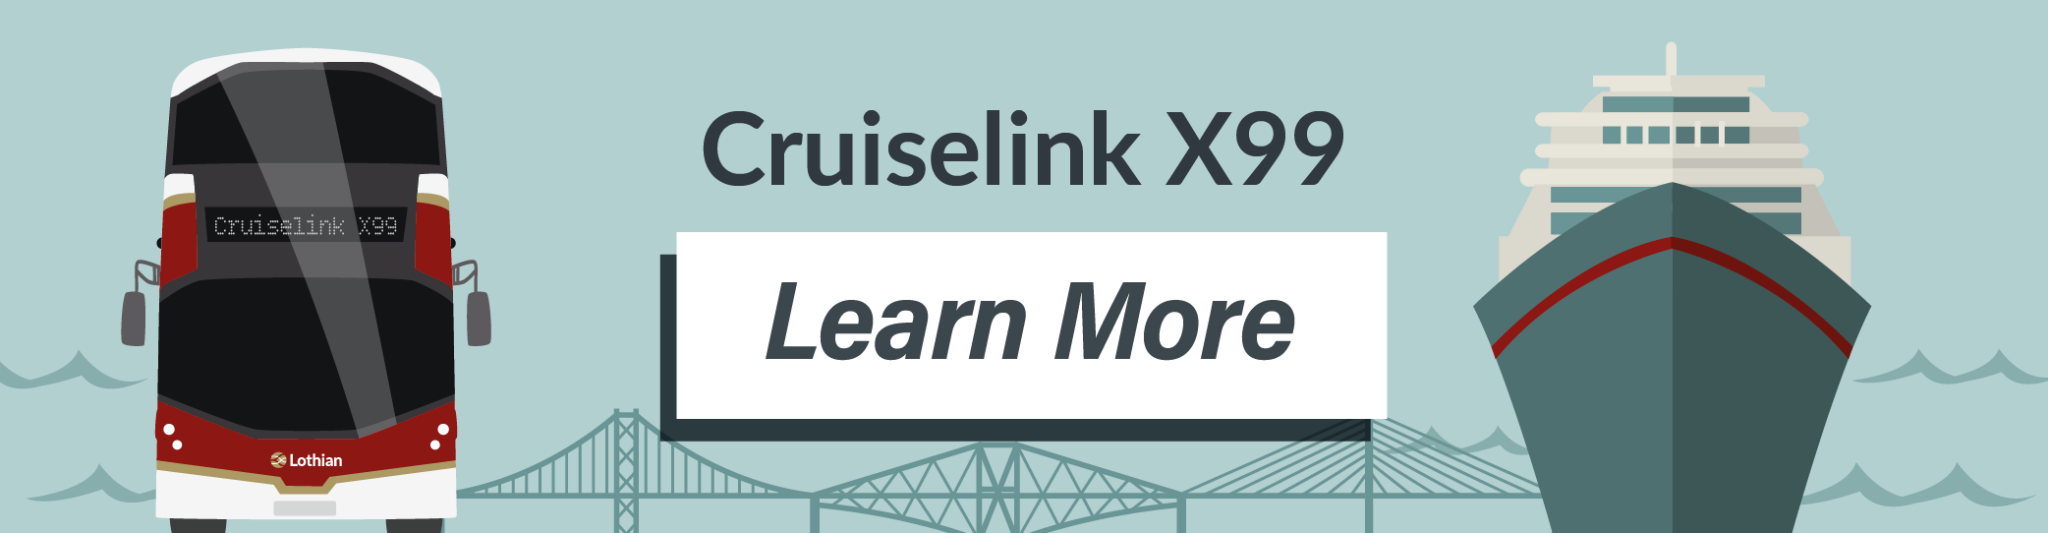 Our Cruiselink X99 is extremely popular with visitors arriving by cruise ship at Queensferry, providing direct, convenient and comfortable travel into Edinburgh and the Lothians. Learn More.